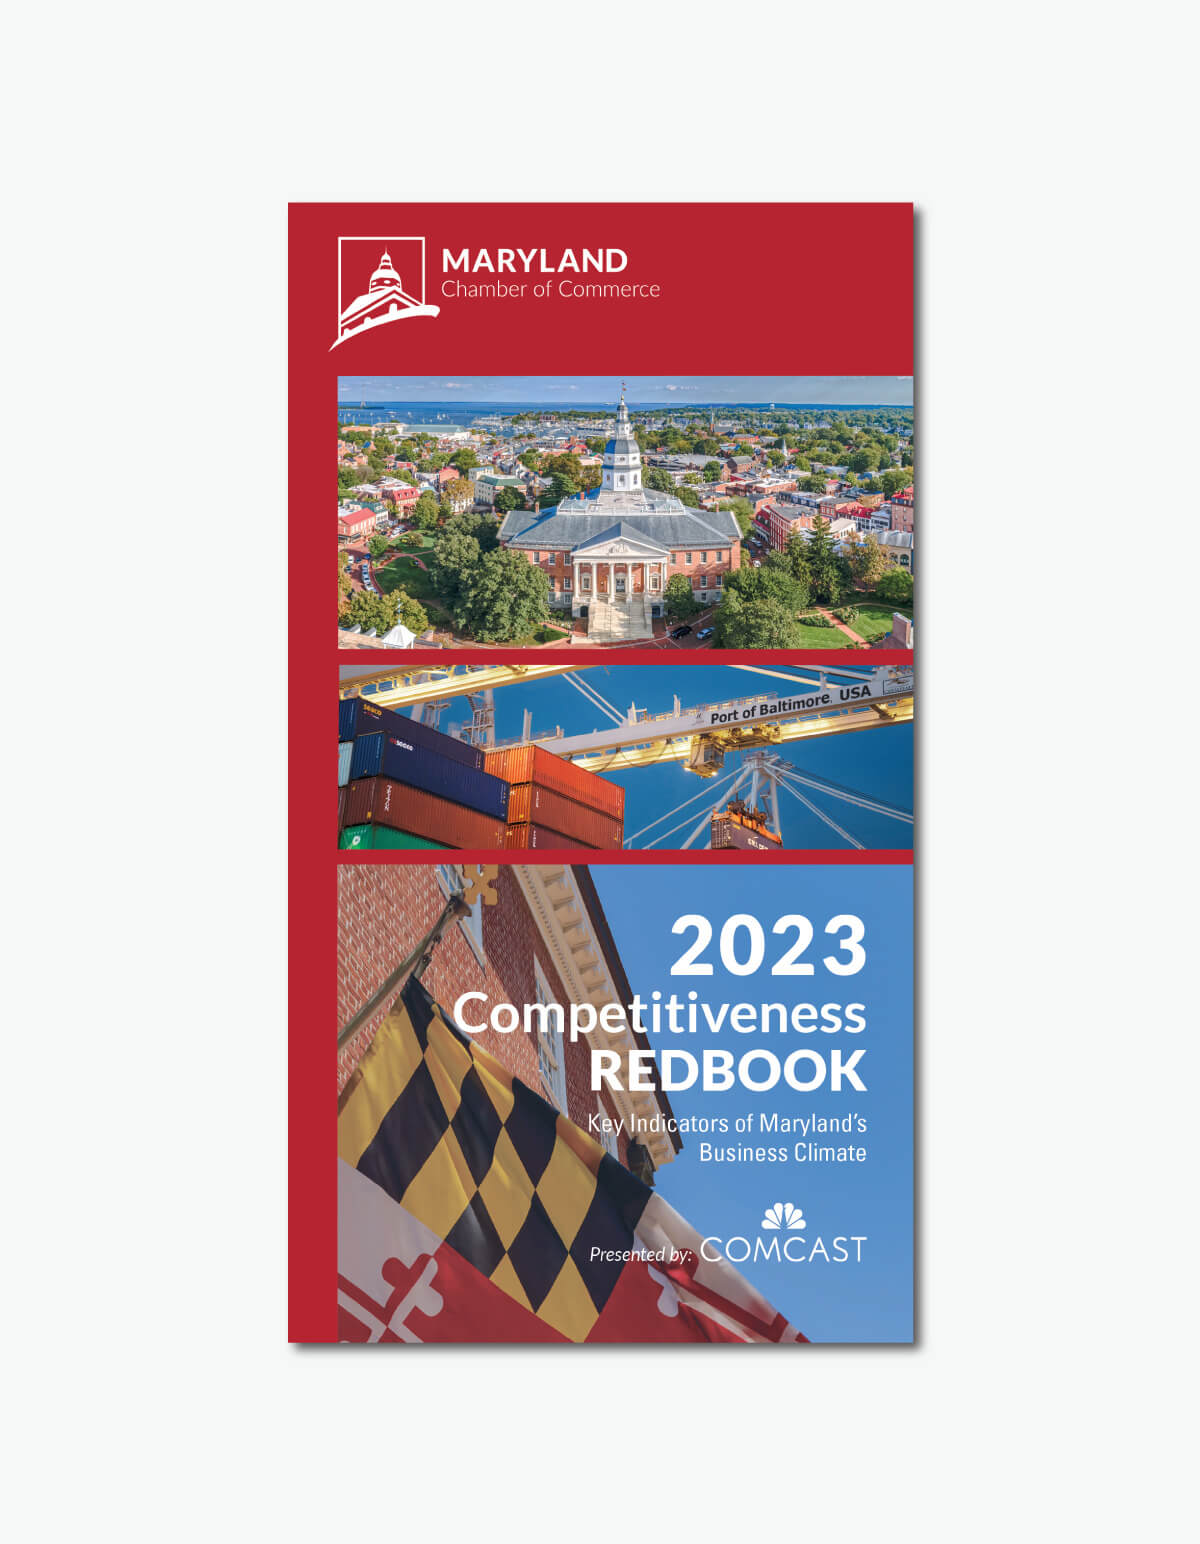 The front cover of the Maryland Chamber of Commerce’s 2023 Competitiveness Redbook, which includes numerous charts providing information about where Maryland ranks in terms of key economic indicators versus other states.